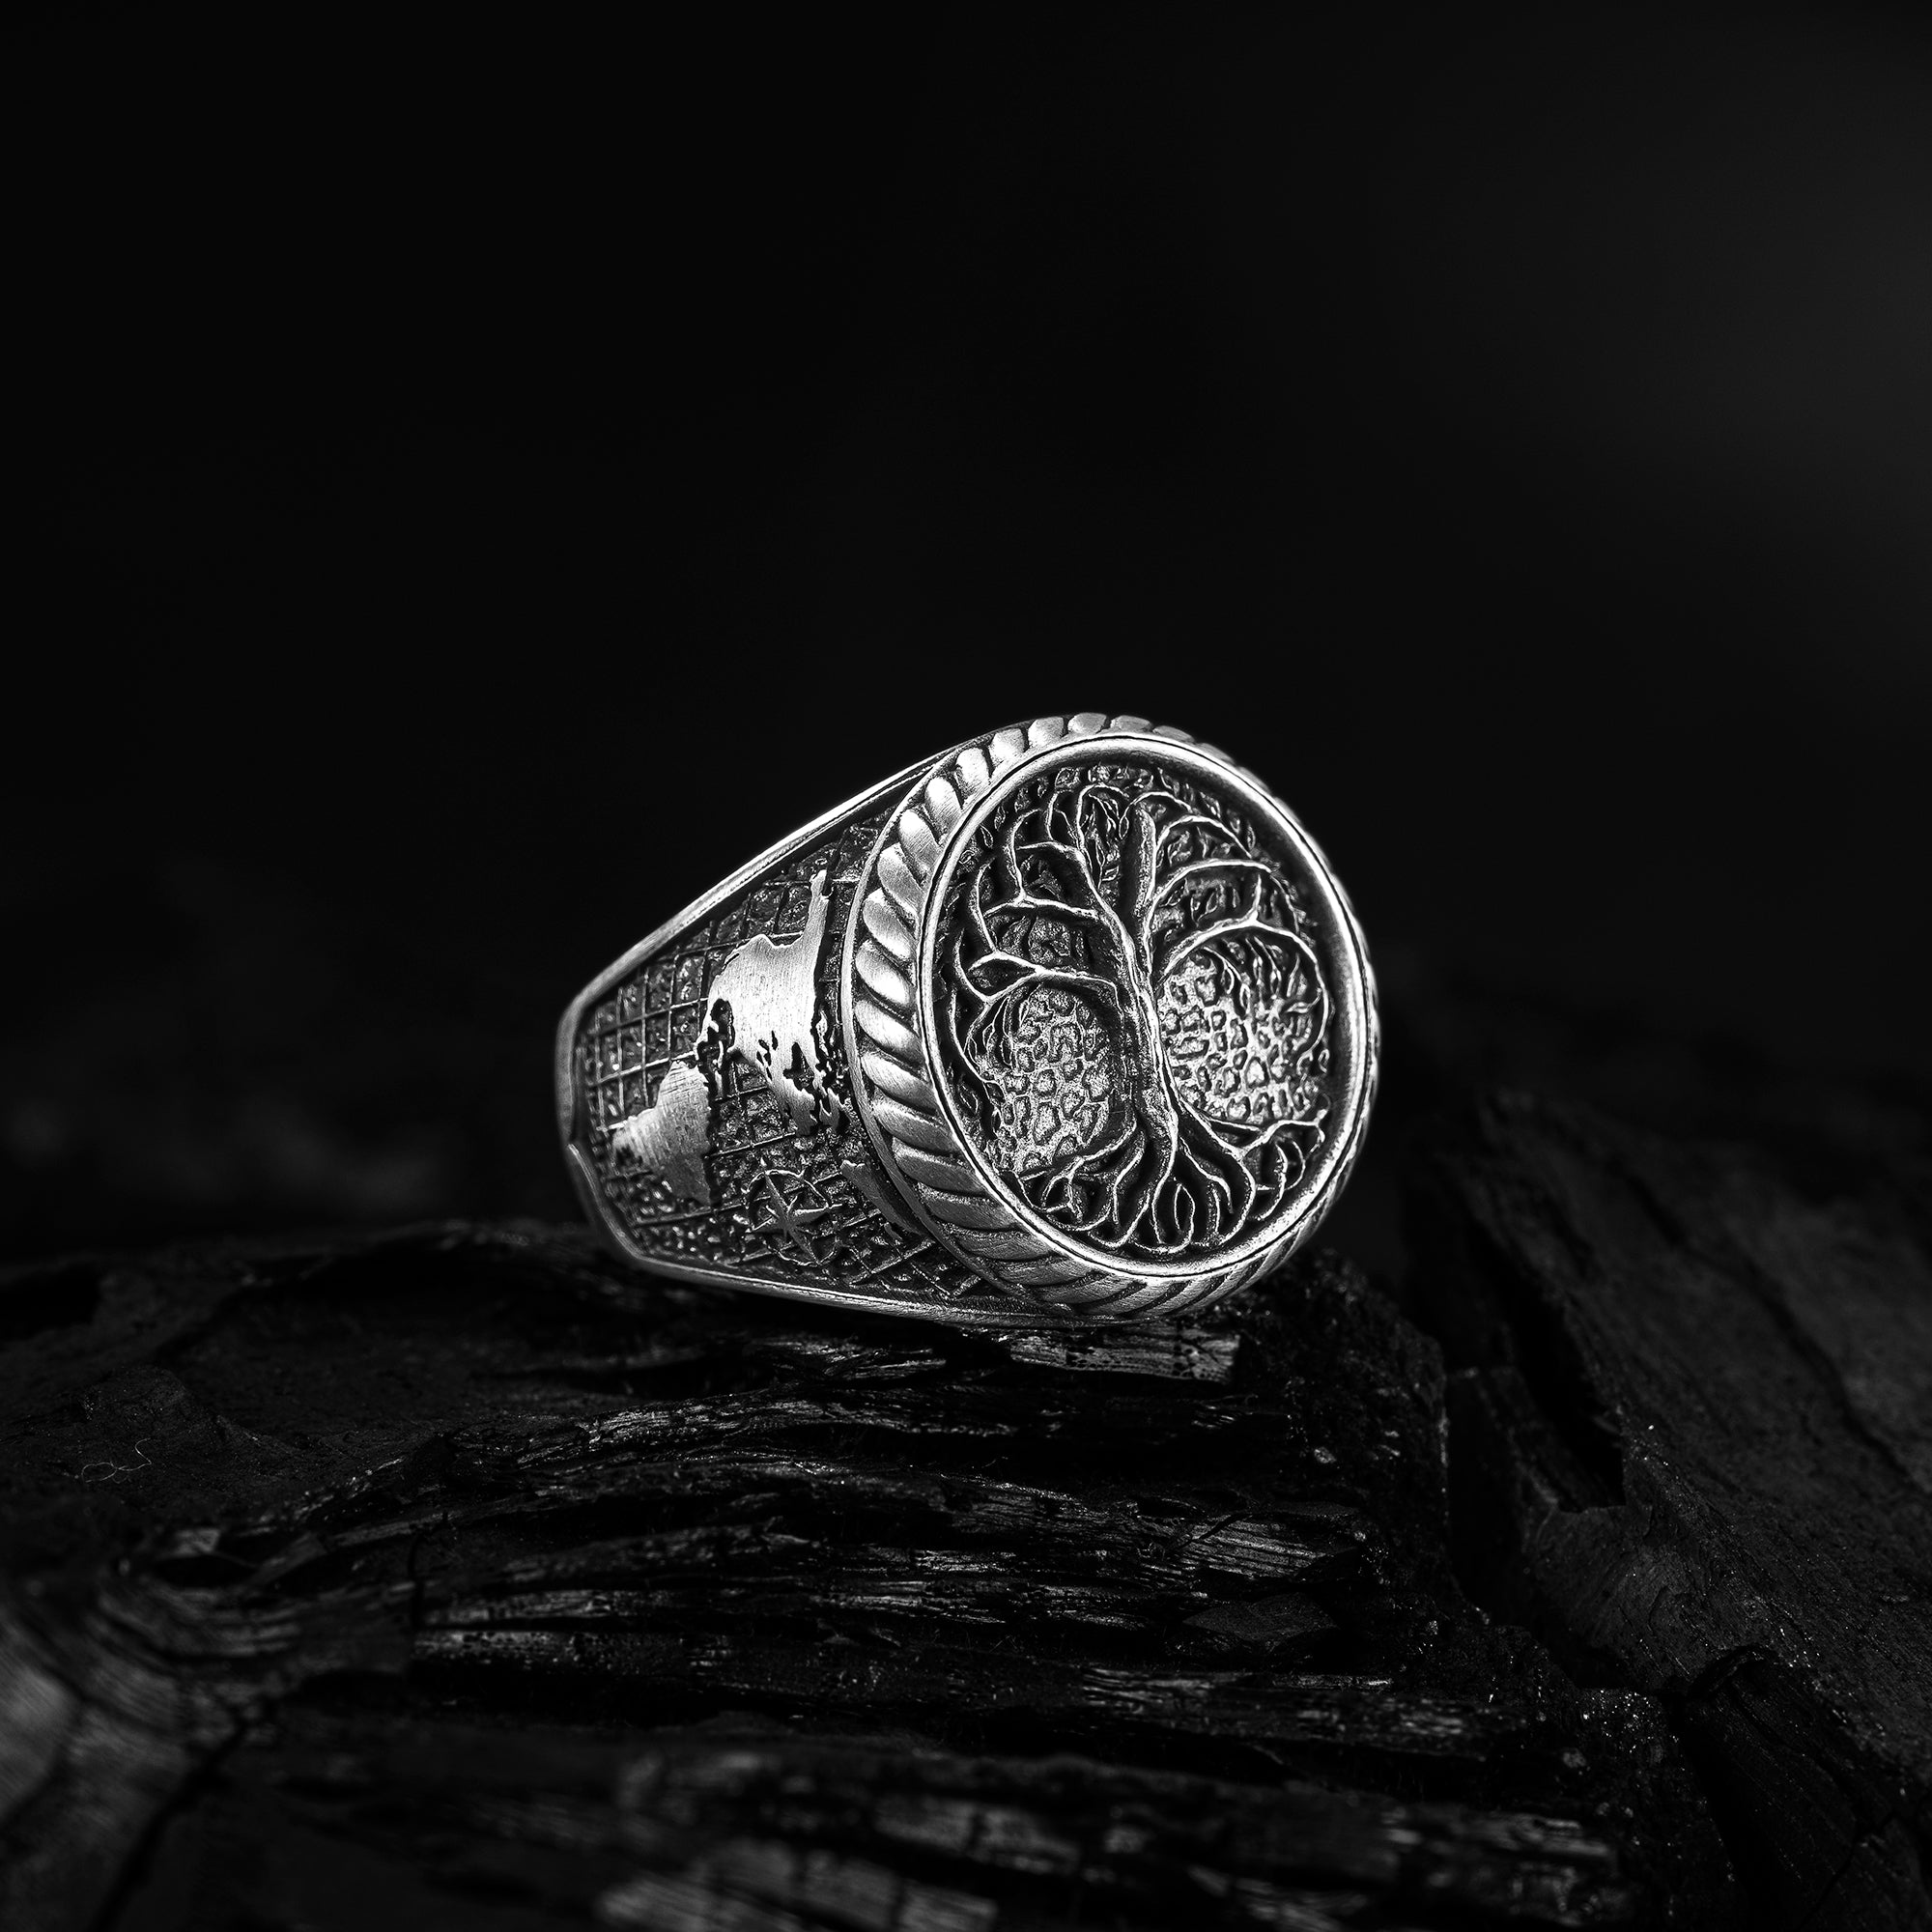 Yggdrasill Tree Of Life Family Tree Rings, World Map and Tree of Life Men's Ring,Silver Men's Ring